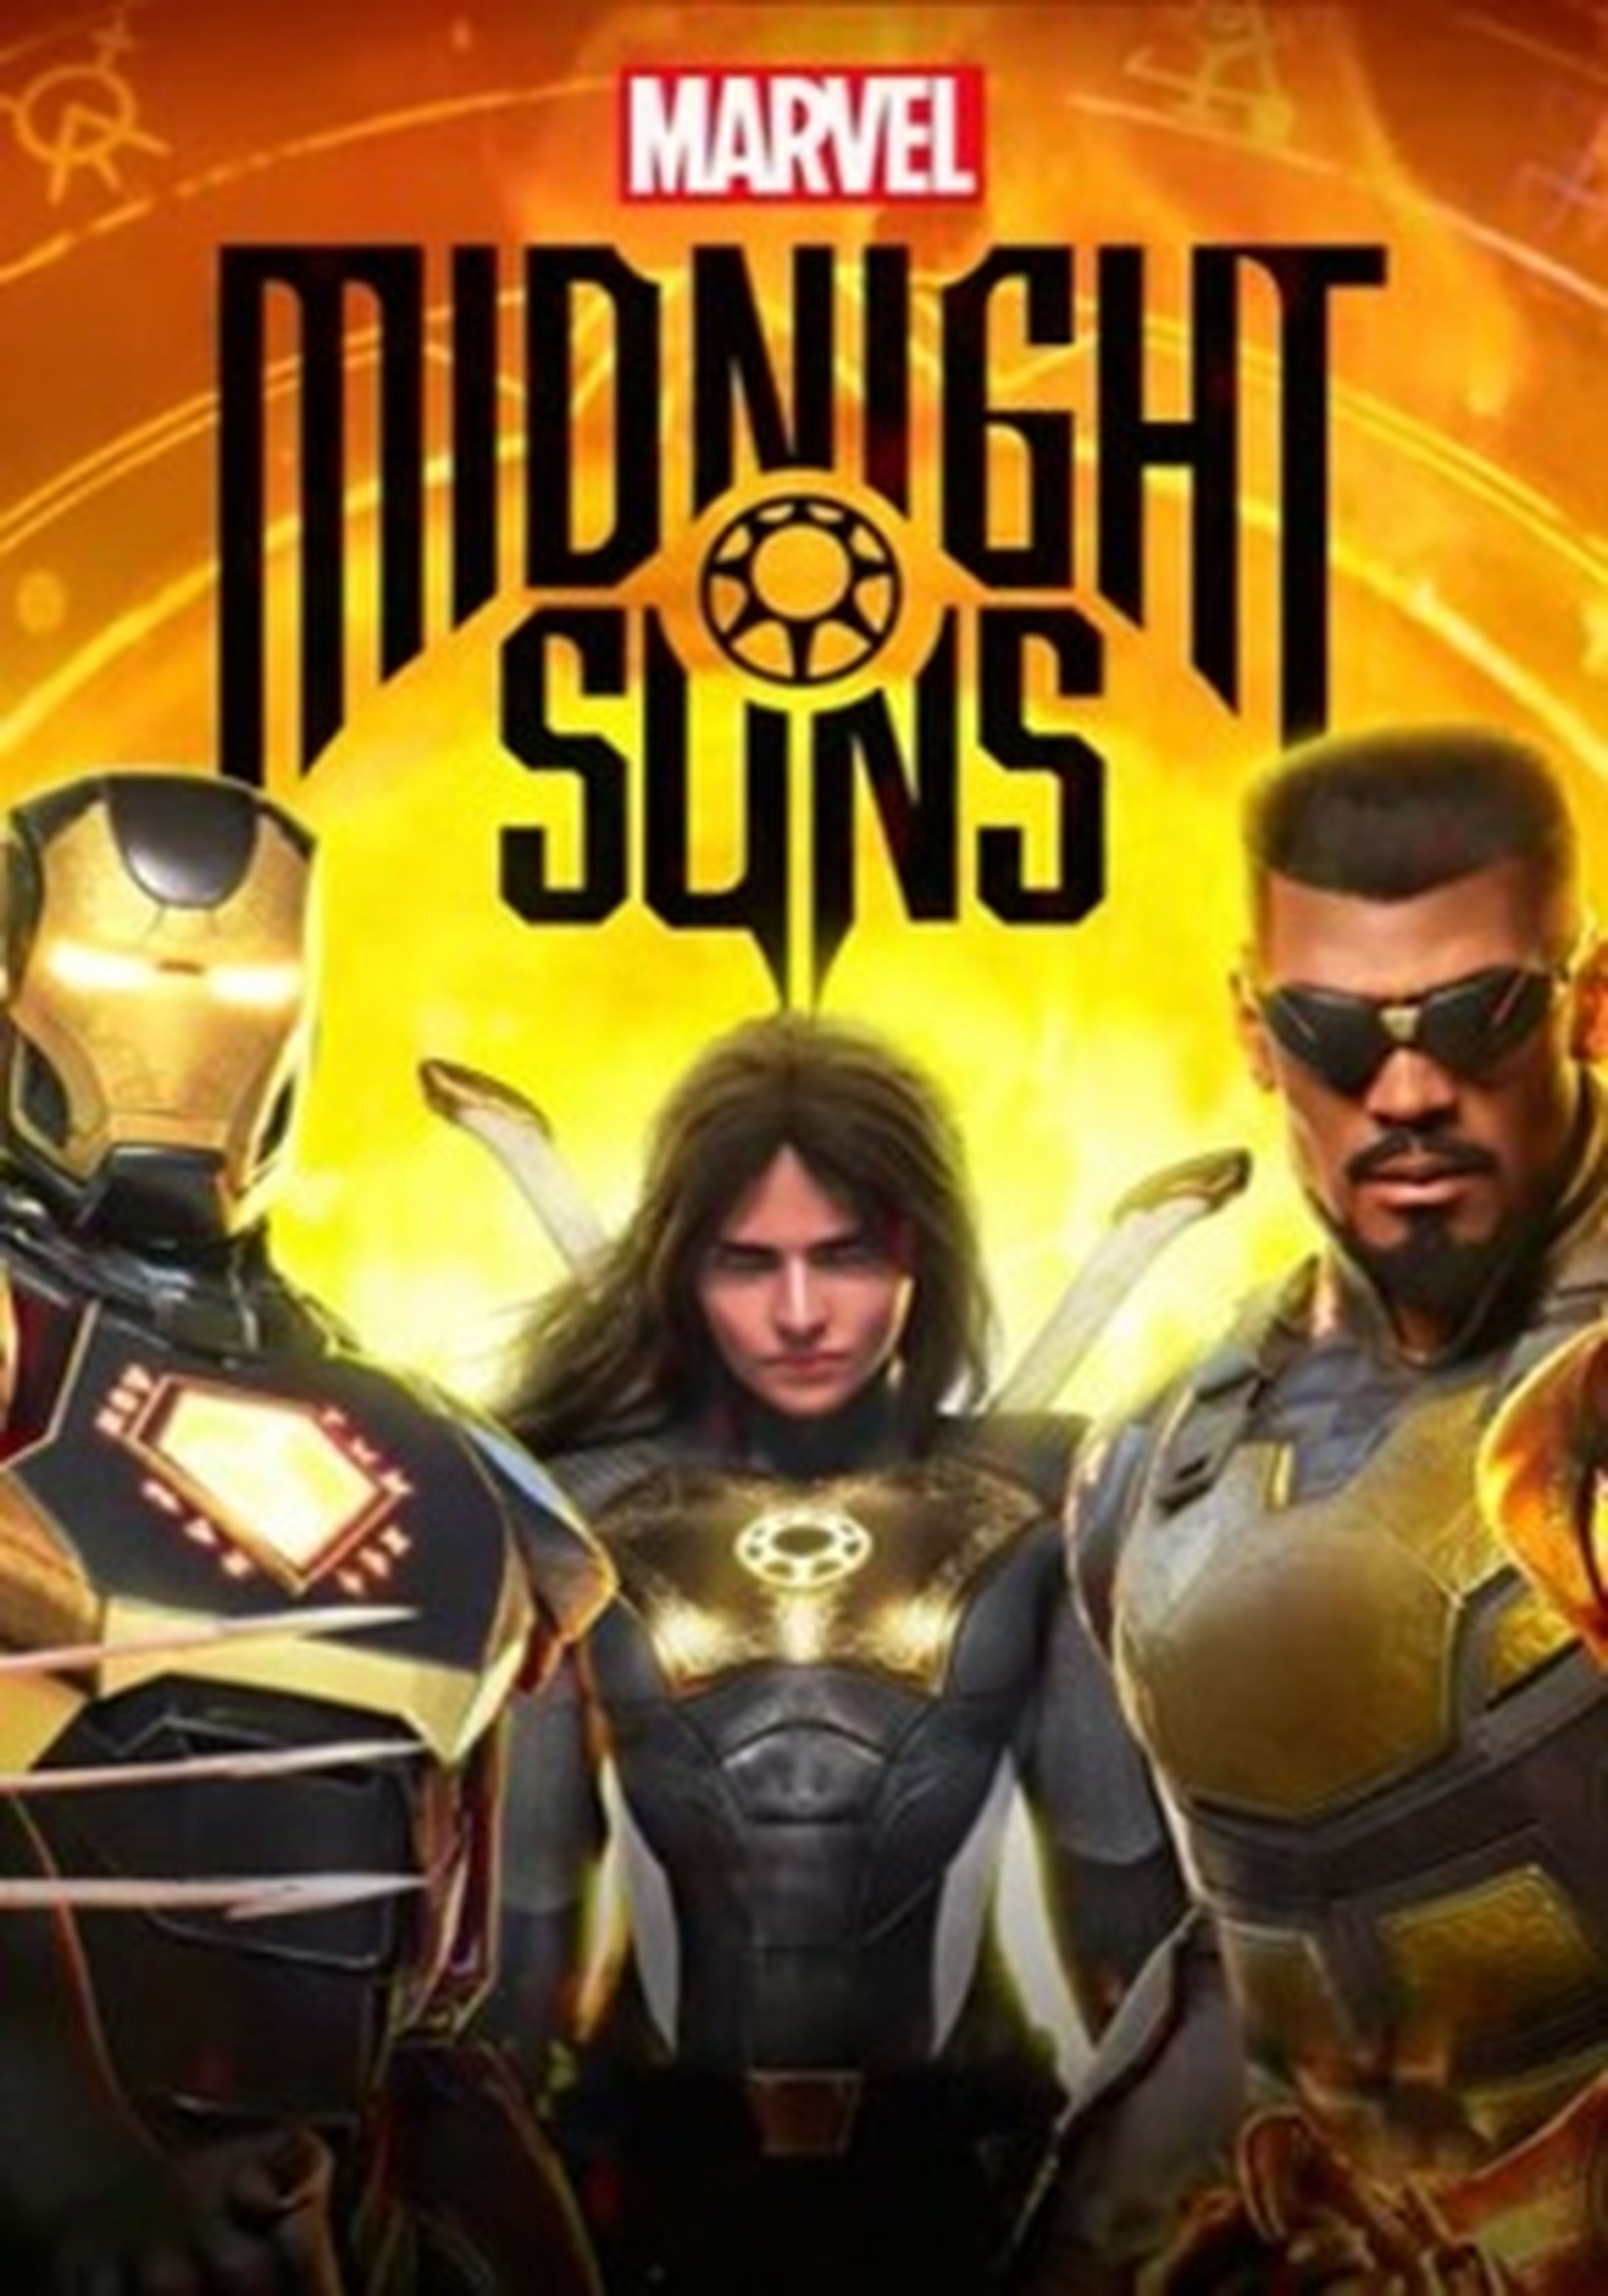 Análisis de Marvel's Midnight Suns para PS4, PS5, Xbox One, Series X/S,  Switch y PC